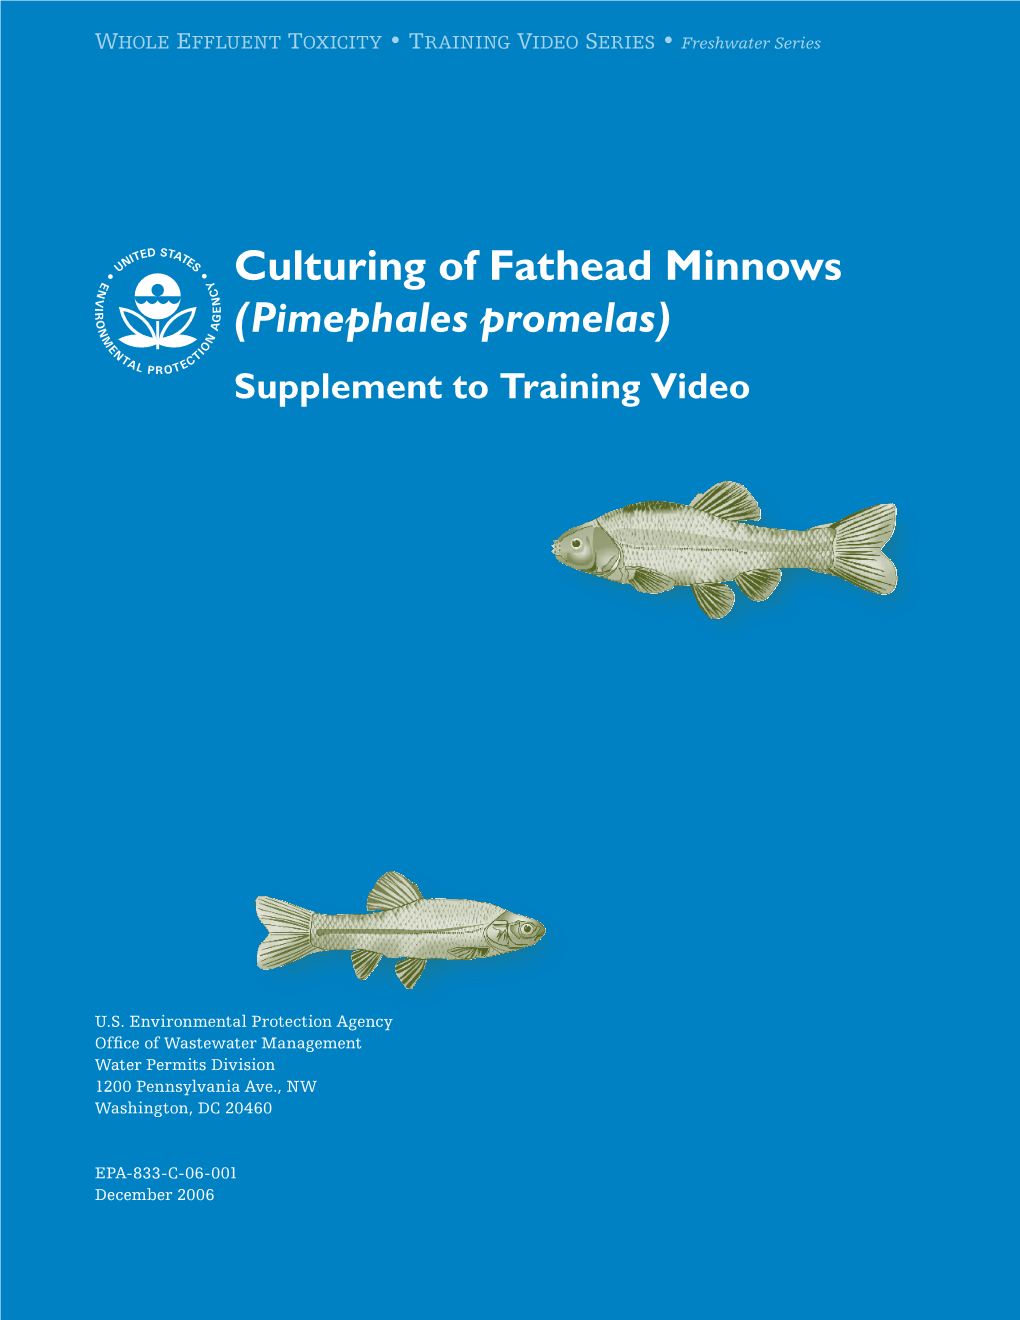 Culturing of Fathead Minnows (Pimephales Promelas) Supplement to Training Video